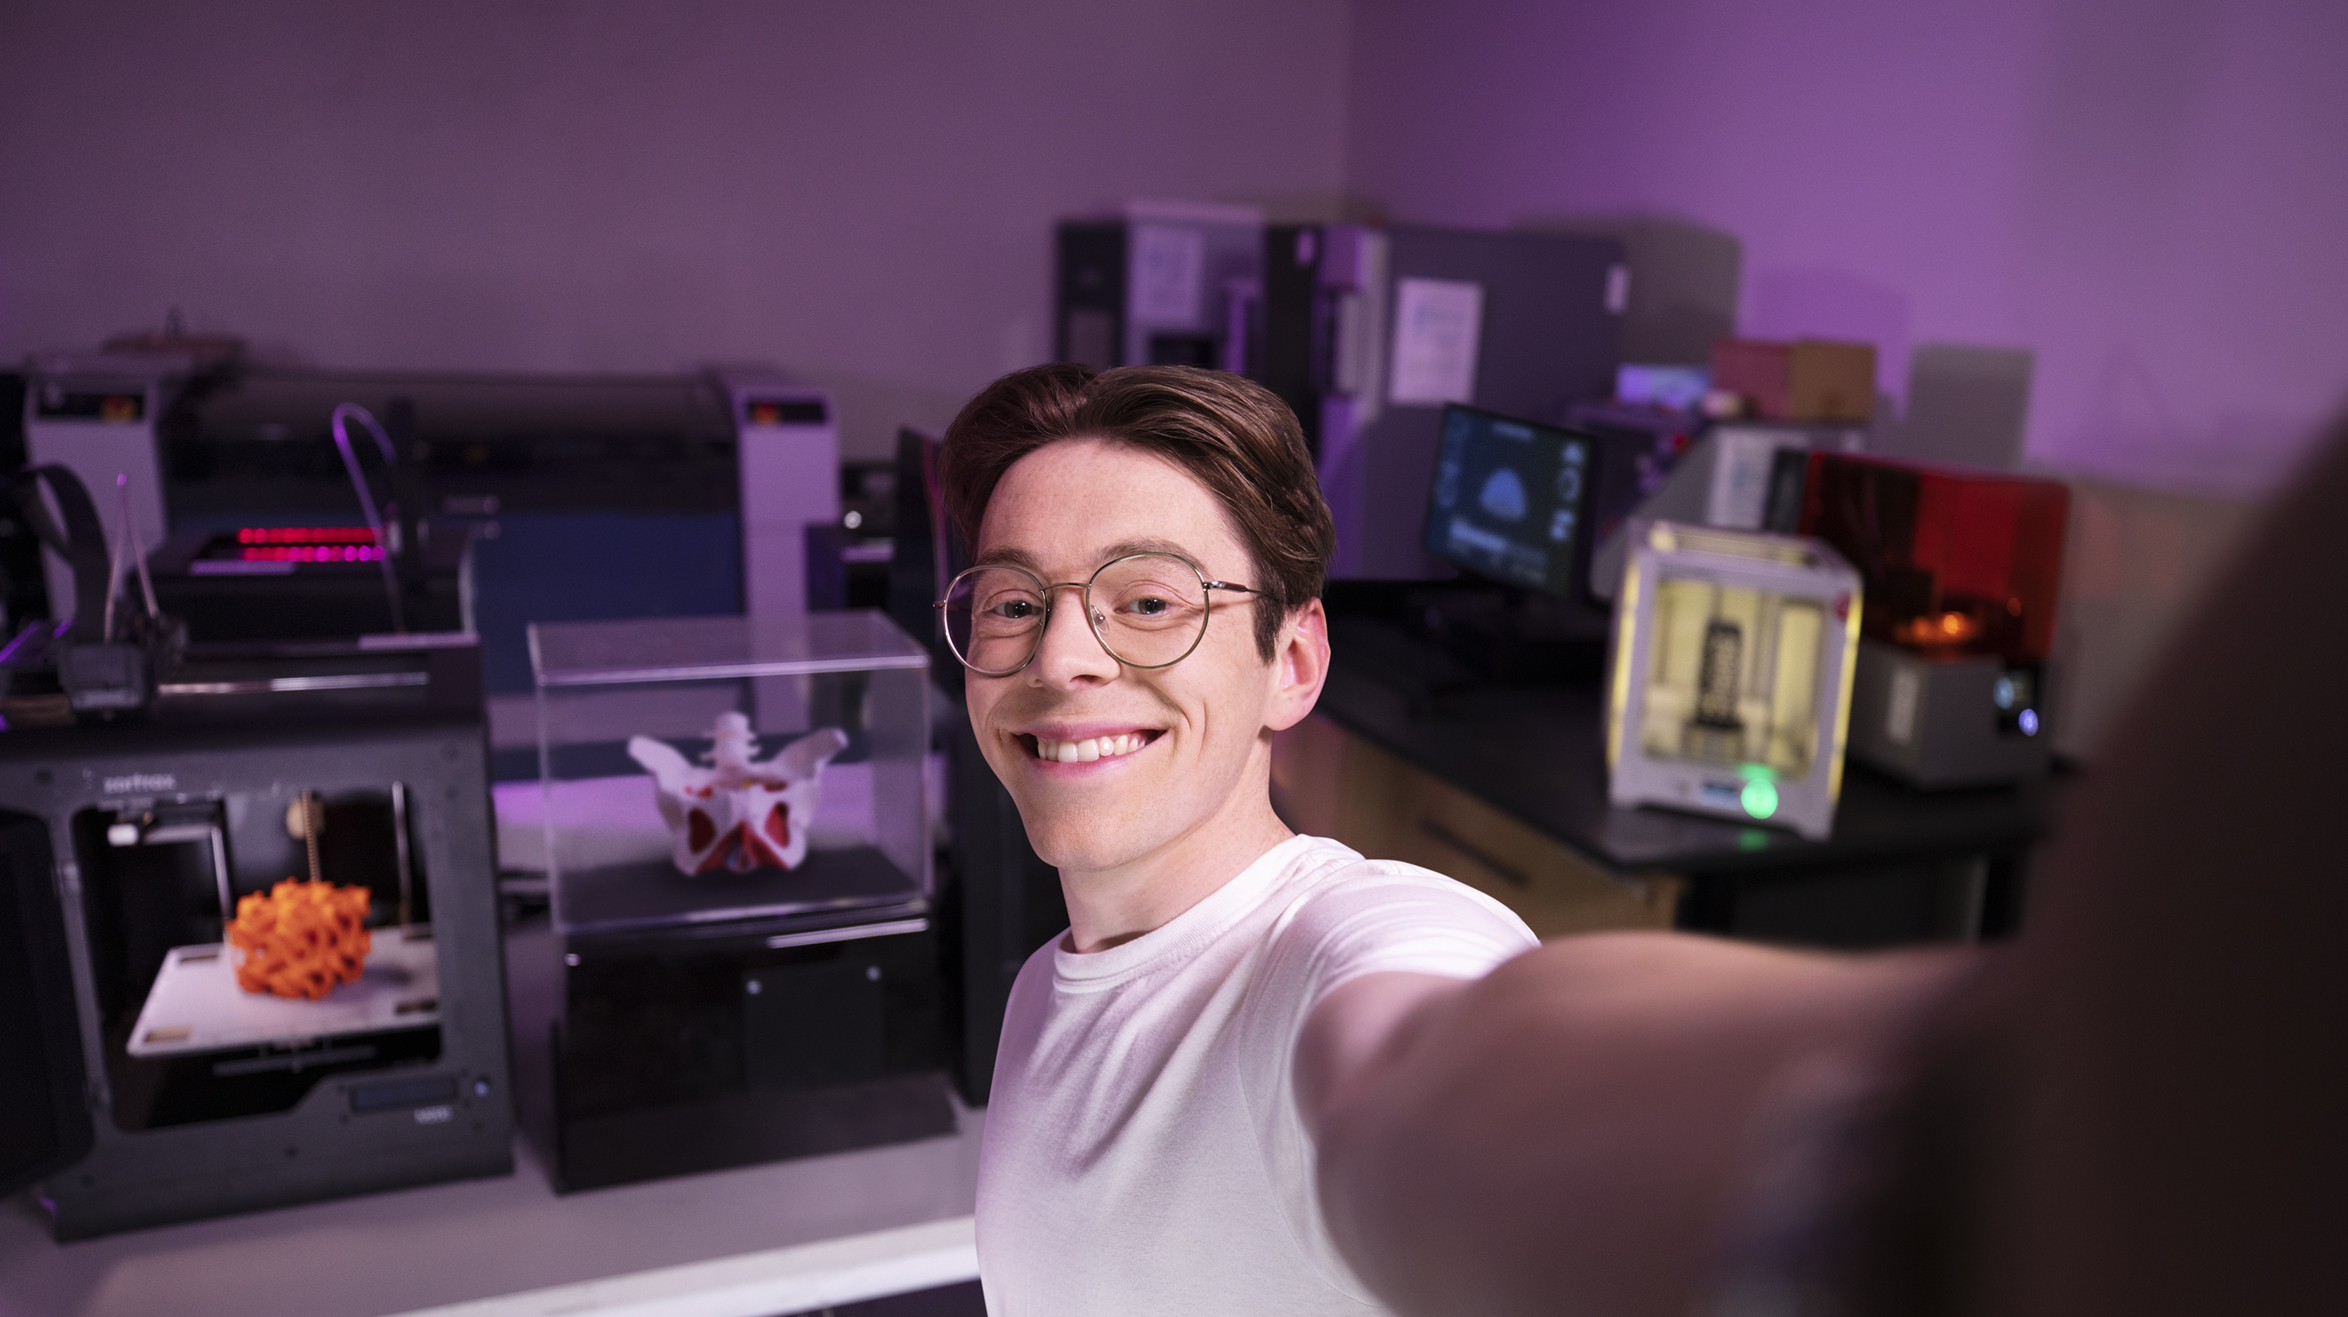 Male student smiling at the camera taking a selfie style photo, in the background shows a dimly lit science lab. 